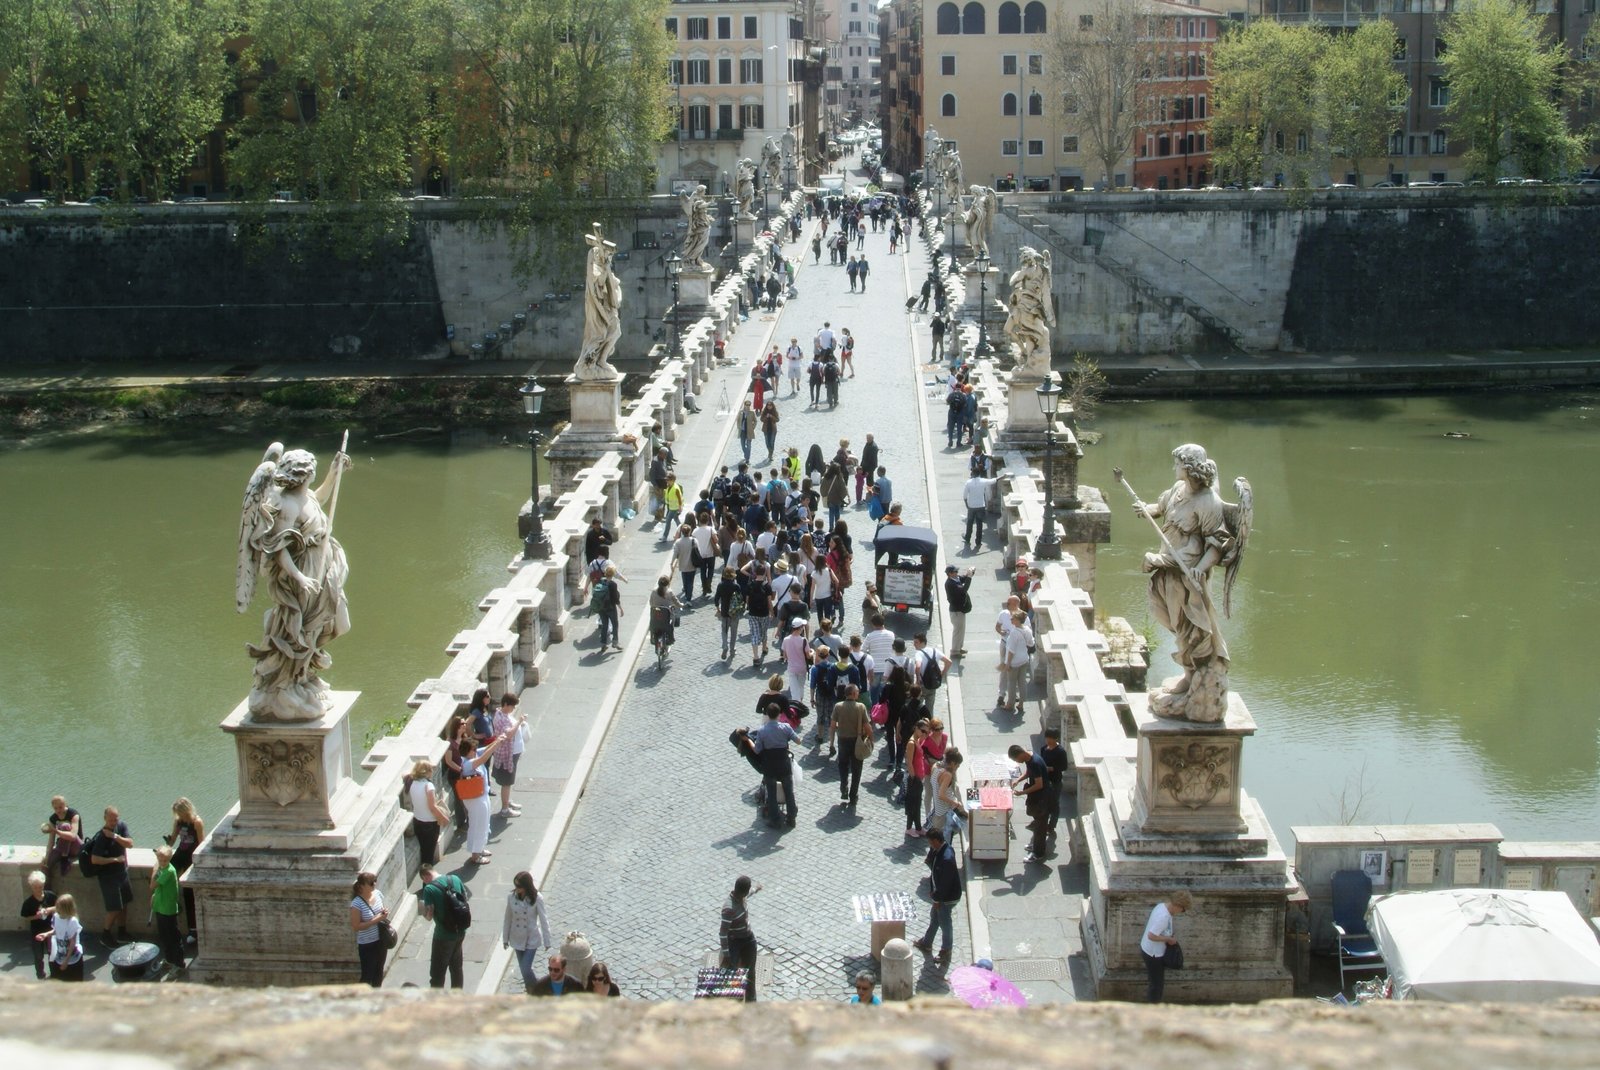 Outside the Castel Sant' Angelo is the Bridge of Angels in Rome, Italy